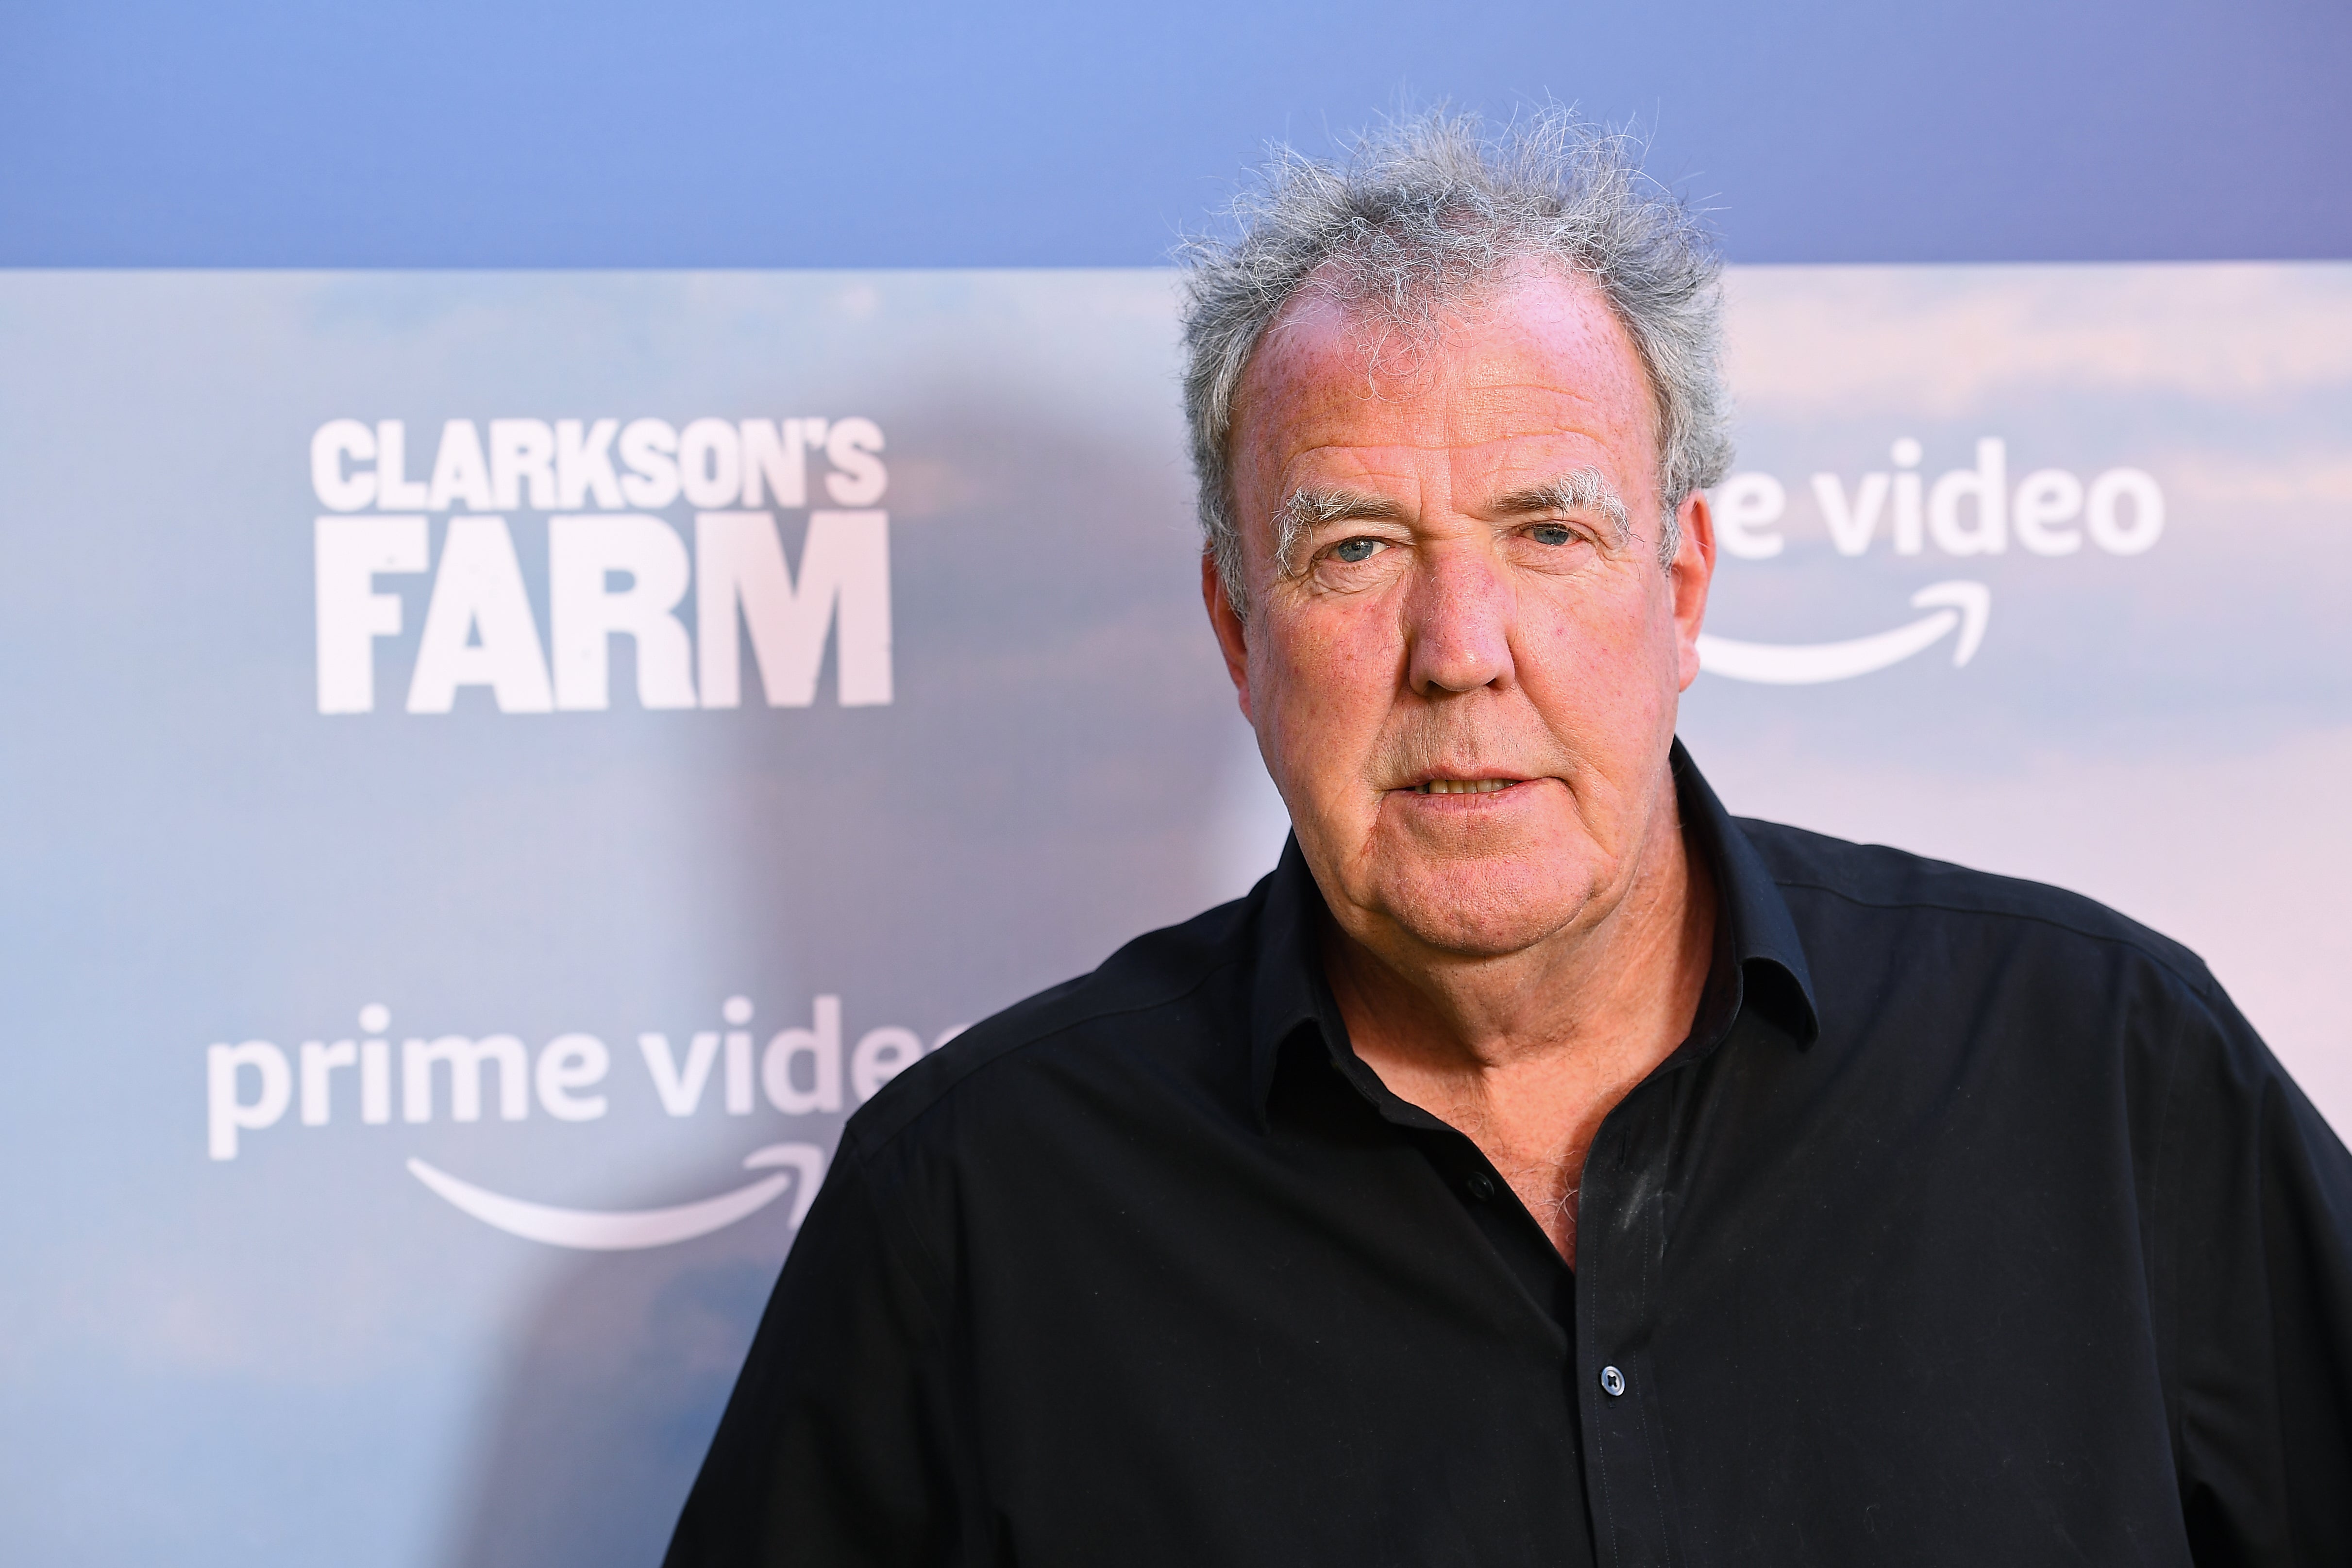 Clarkson’s column about Meghan will be investigated by the press regulator